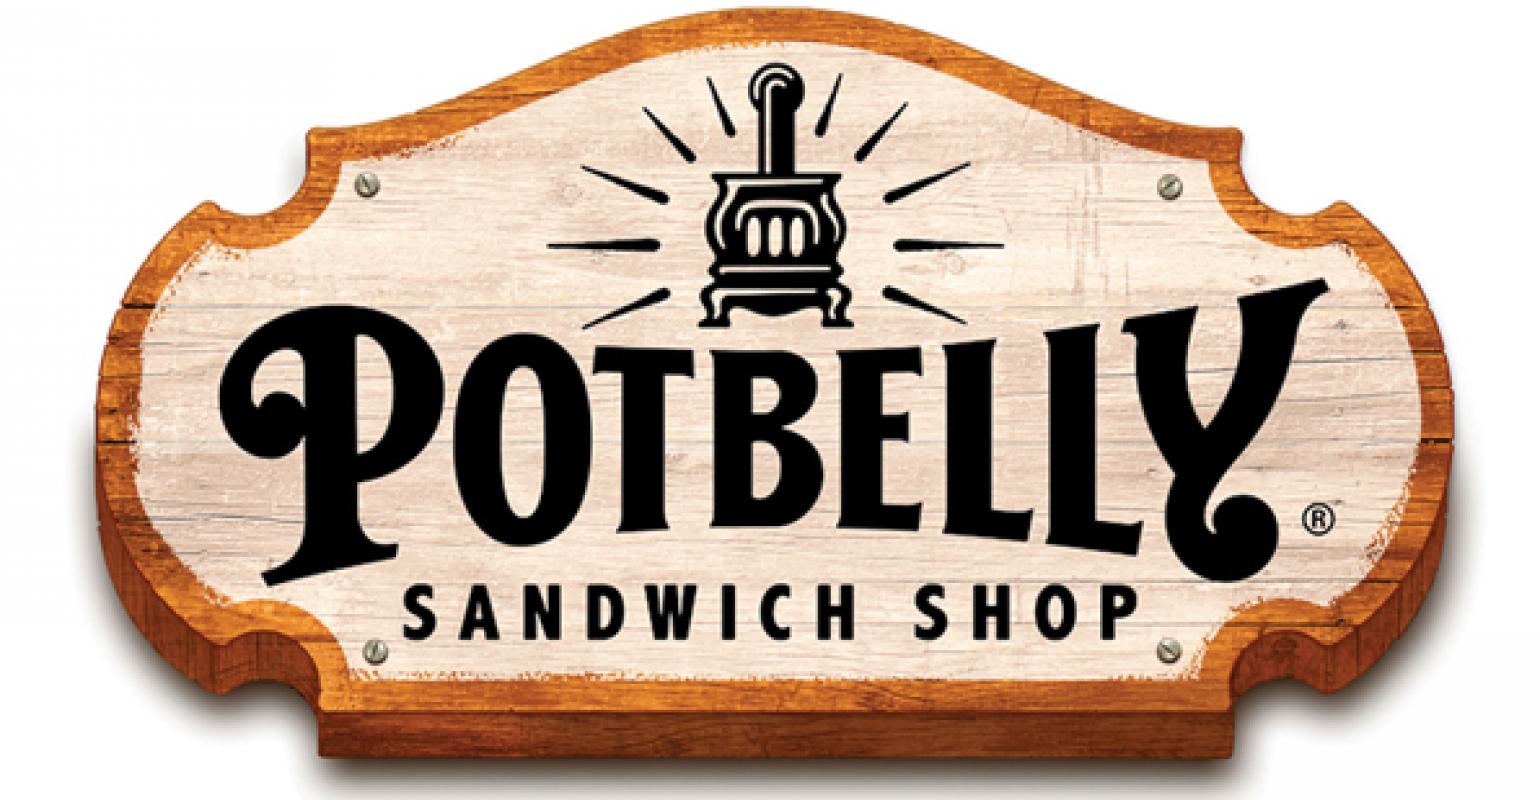 Fastcasual operator Potbelly Corp. expands breakfast in effort to lift